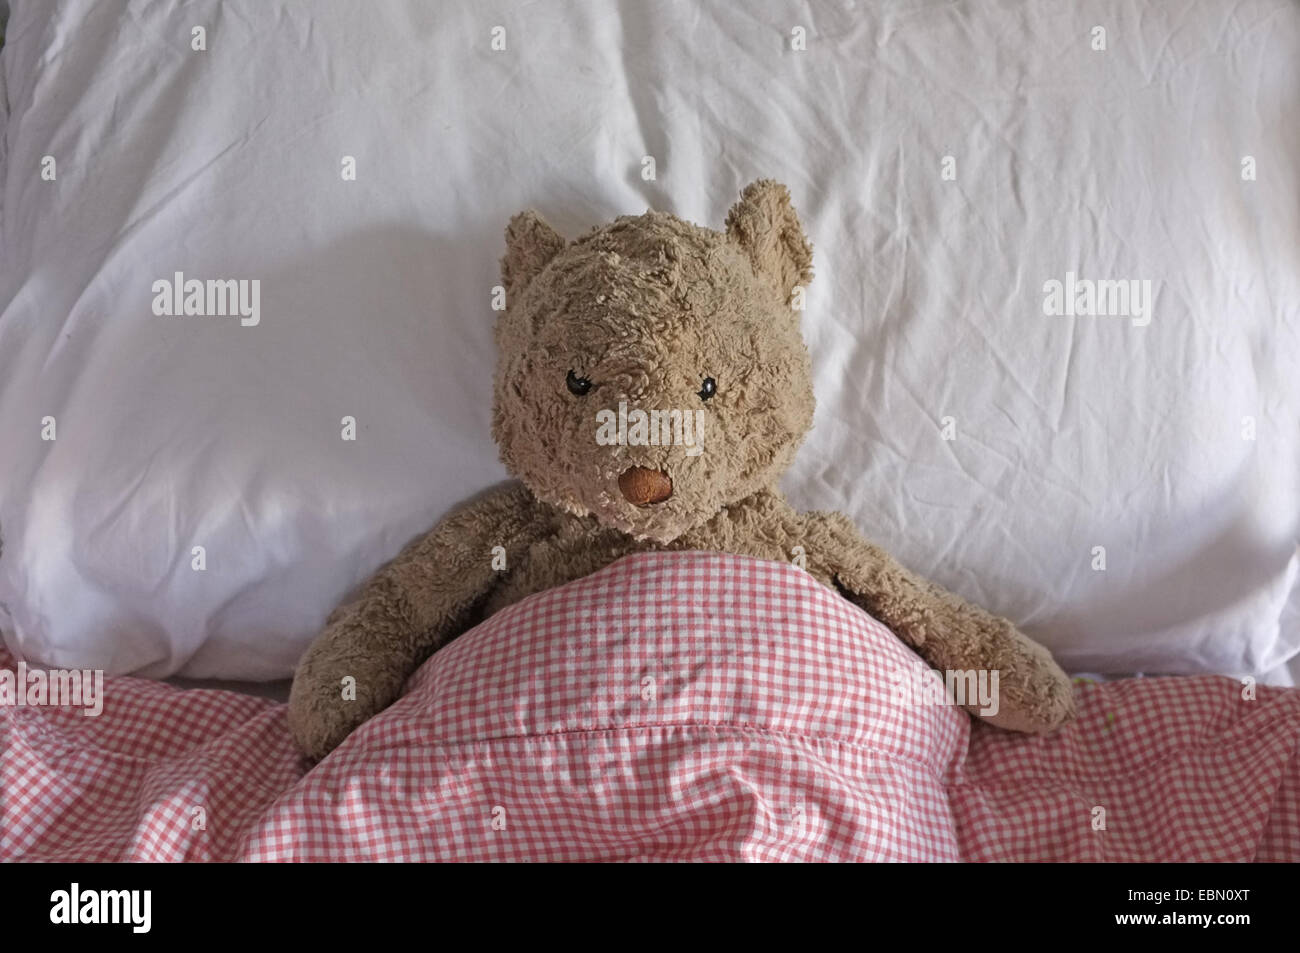 A teddy bear in a young childs bed Stock Photo